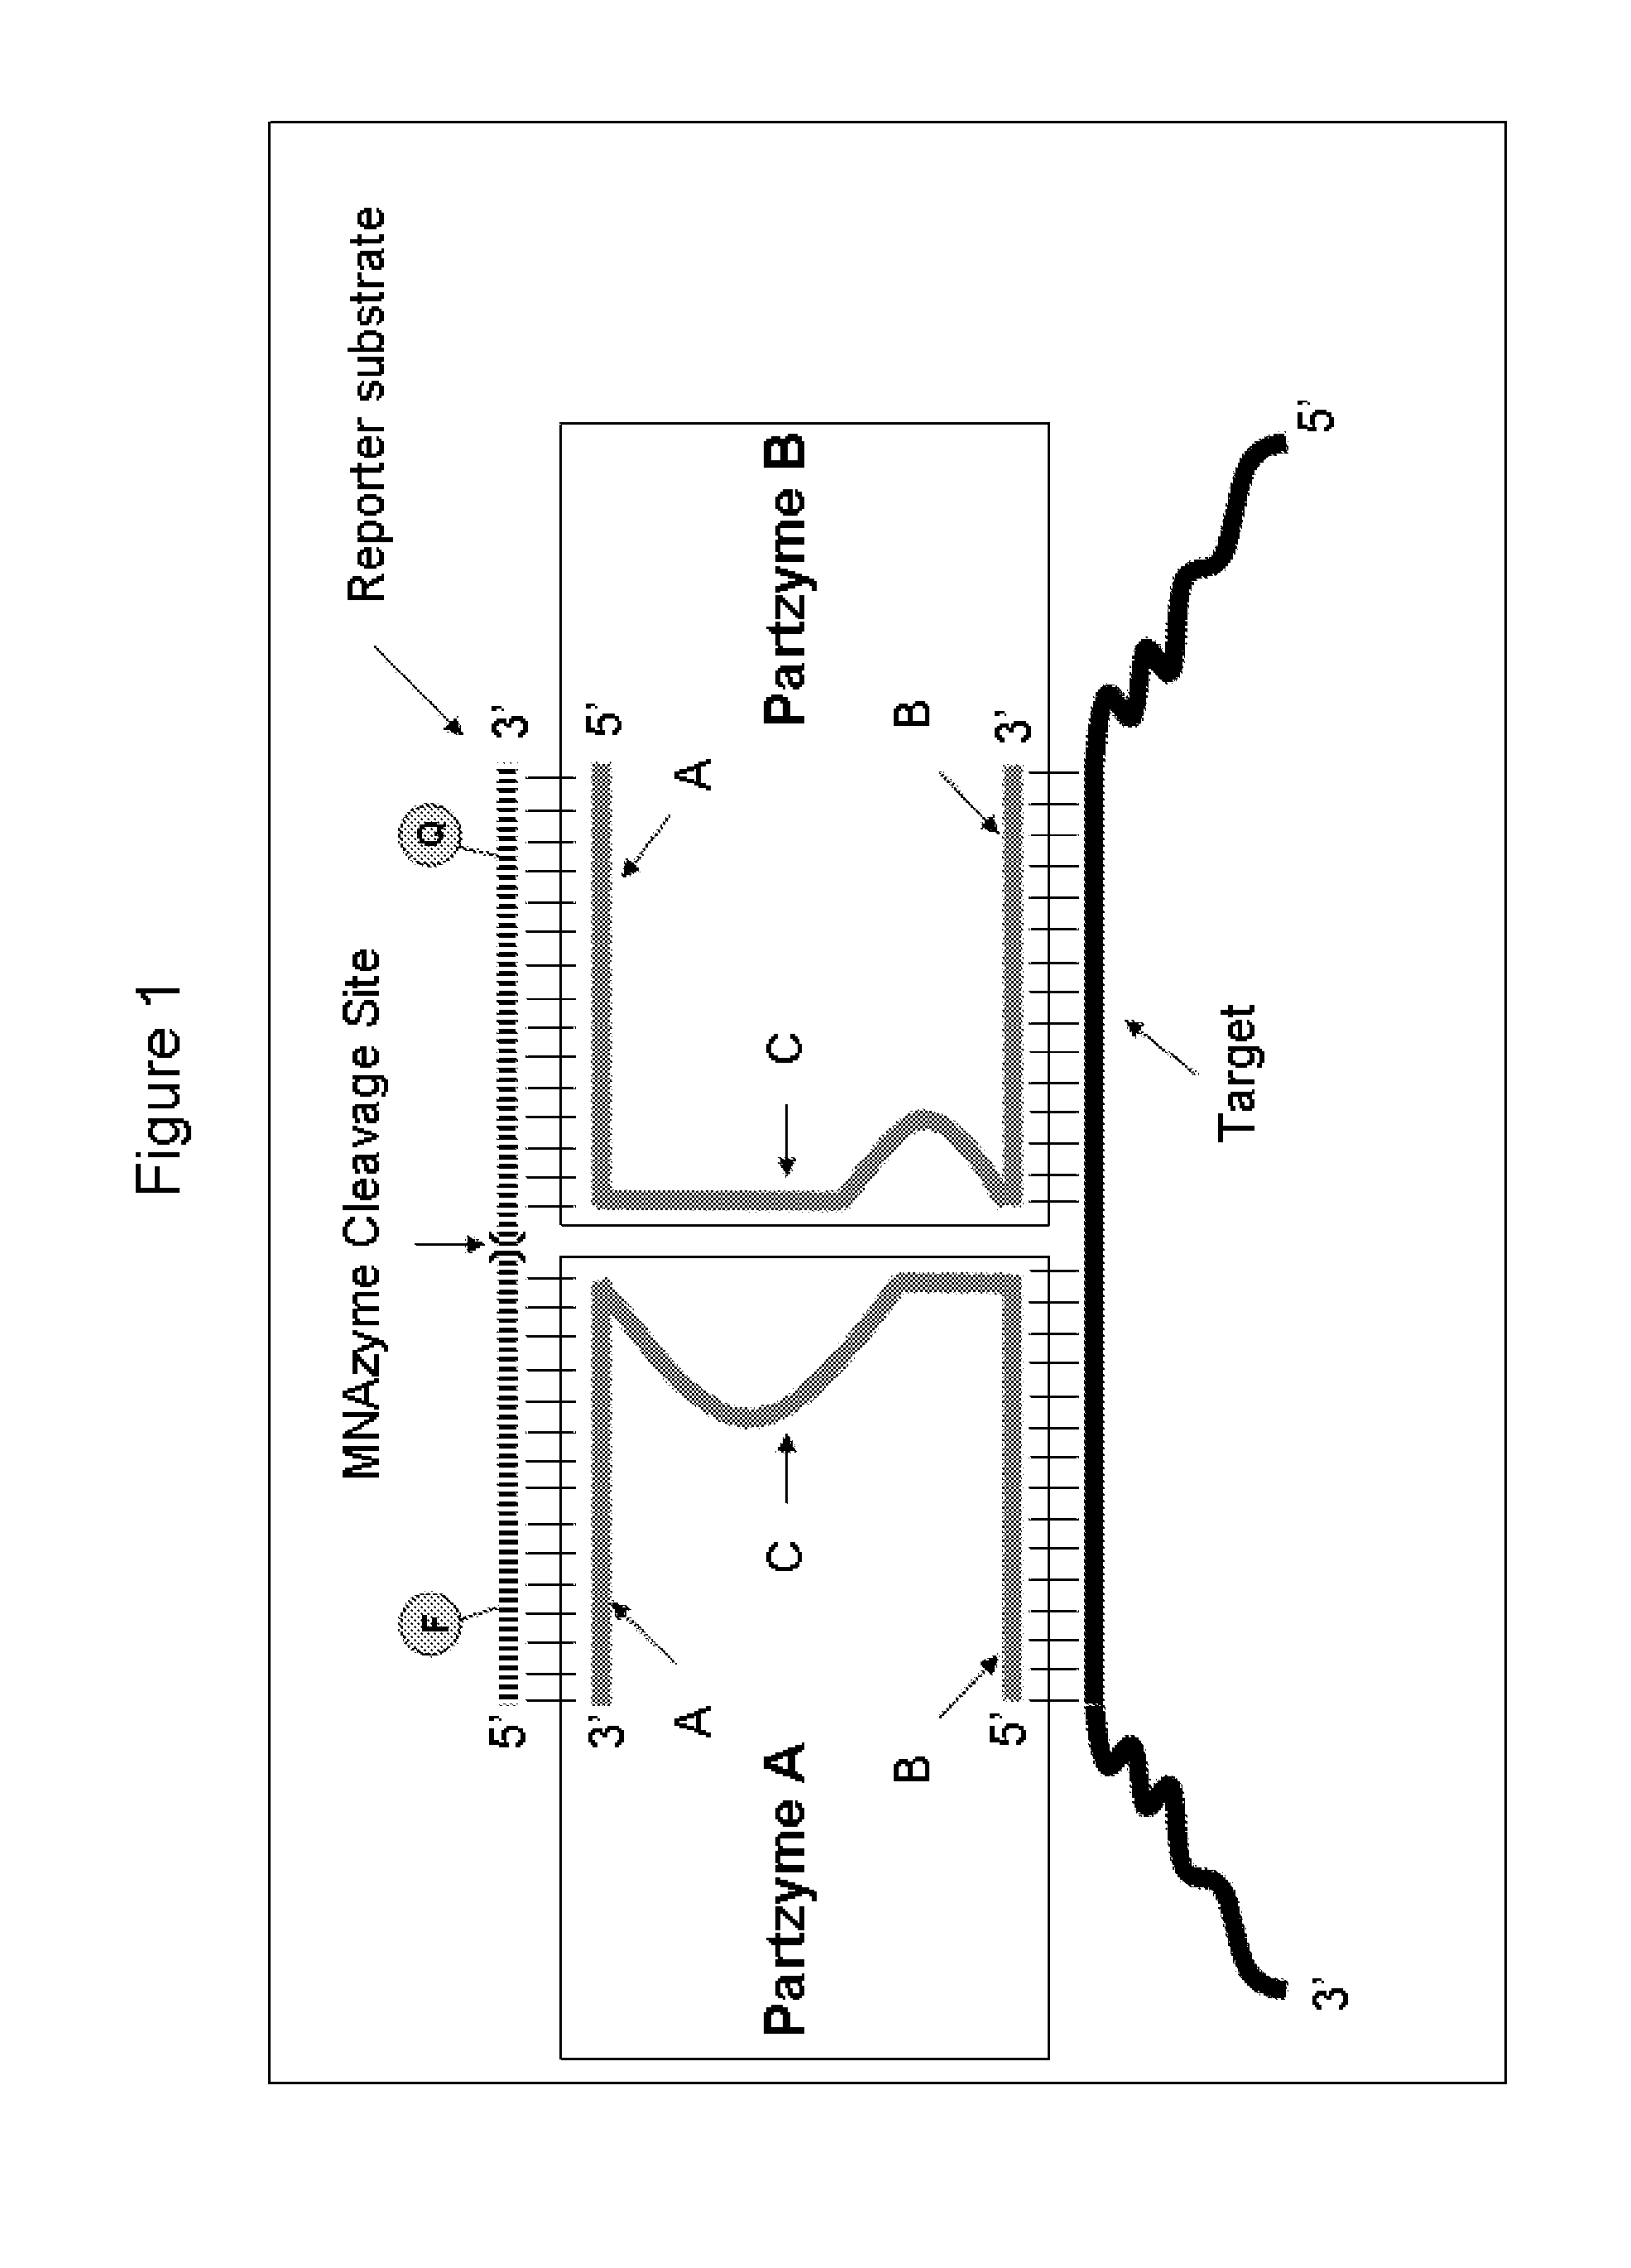 Multicomponent nucleic acid enzymes with cleavage, ligase or other activity and methods for their use